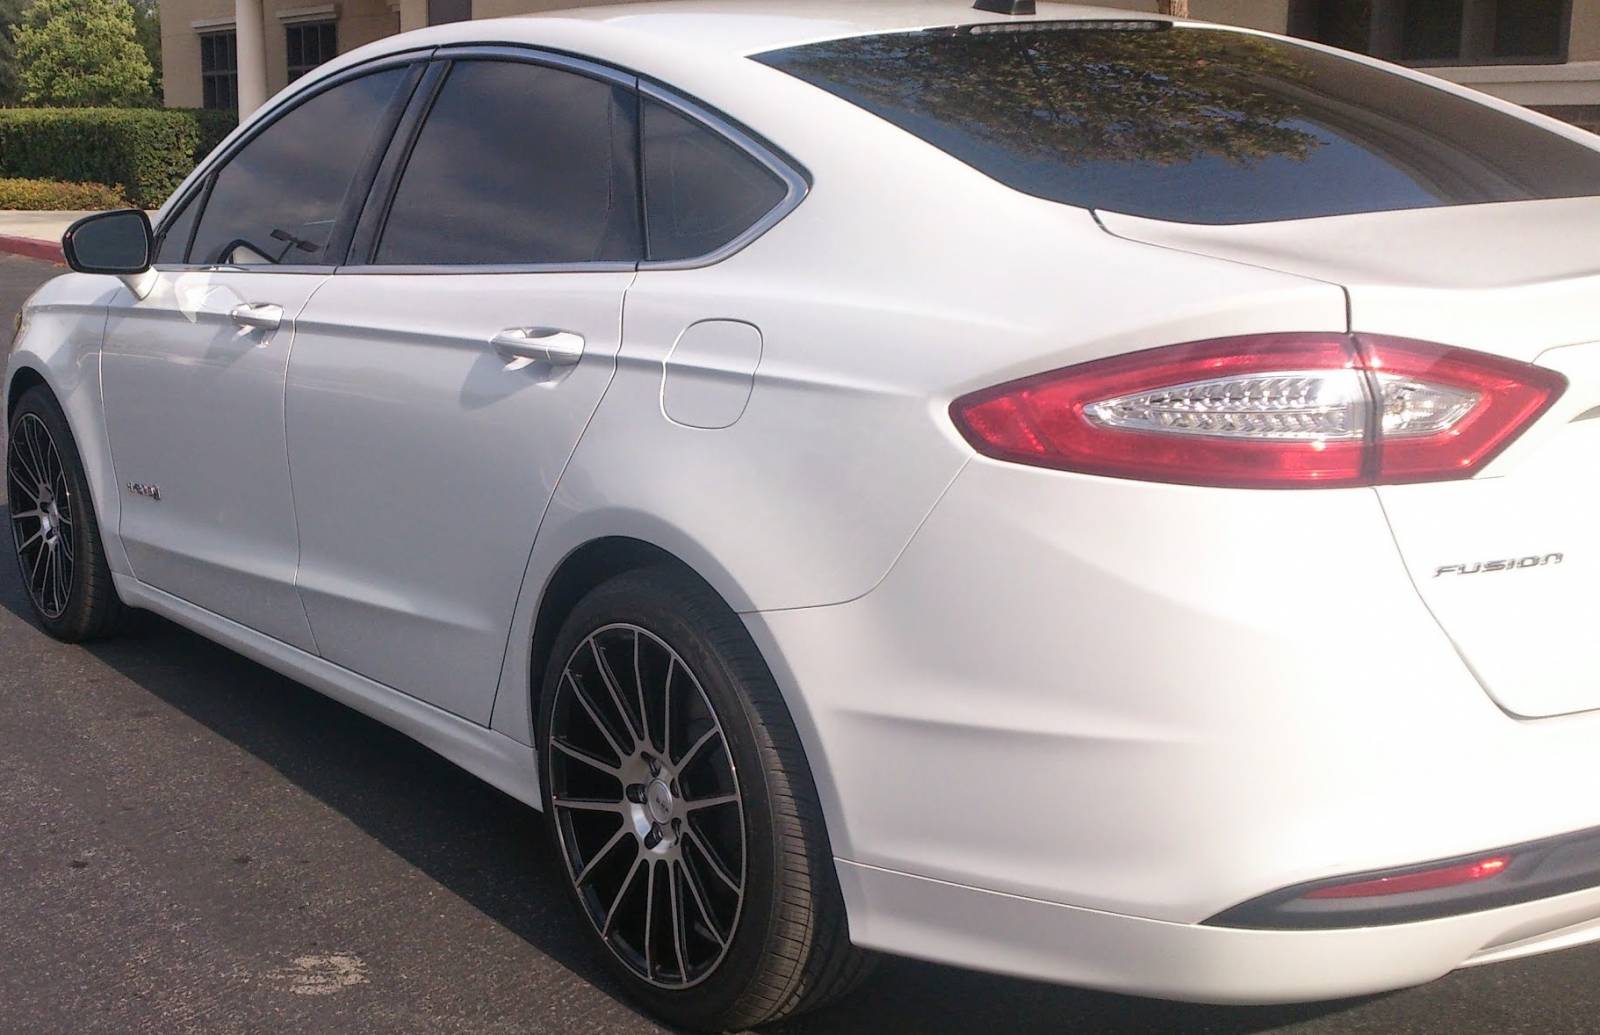 2013 Ford fusion hybrid owners forum #2